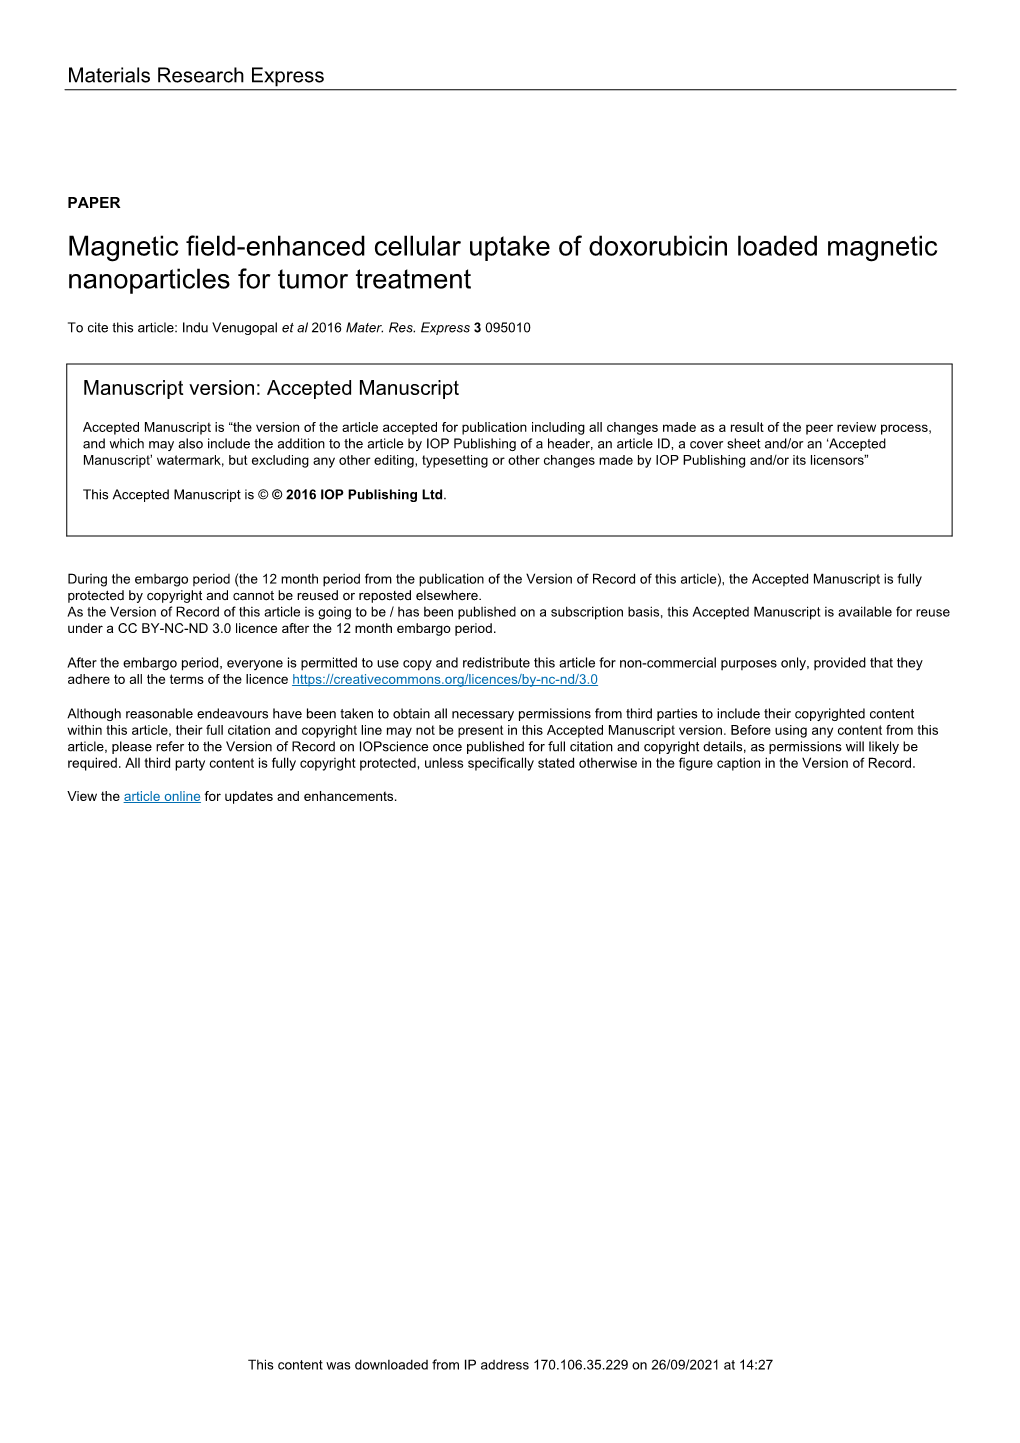 Magnetic Field-Enhanced Cellular Uptake of Doxorubicin Loaded Magnetic Nanoparticles for Tumor Treatment